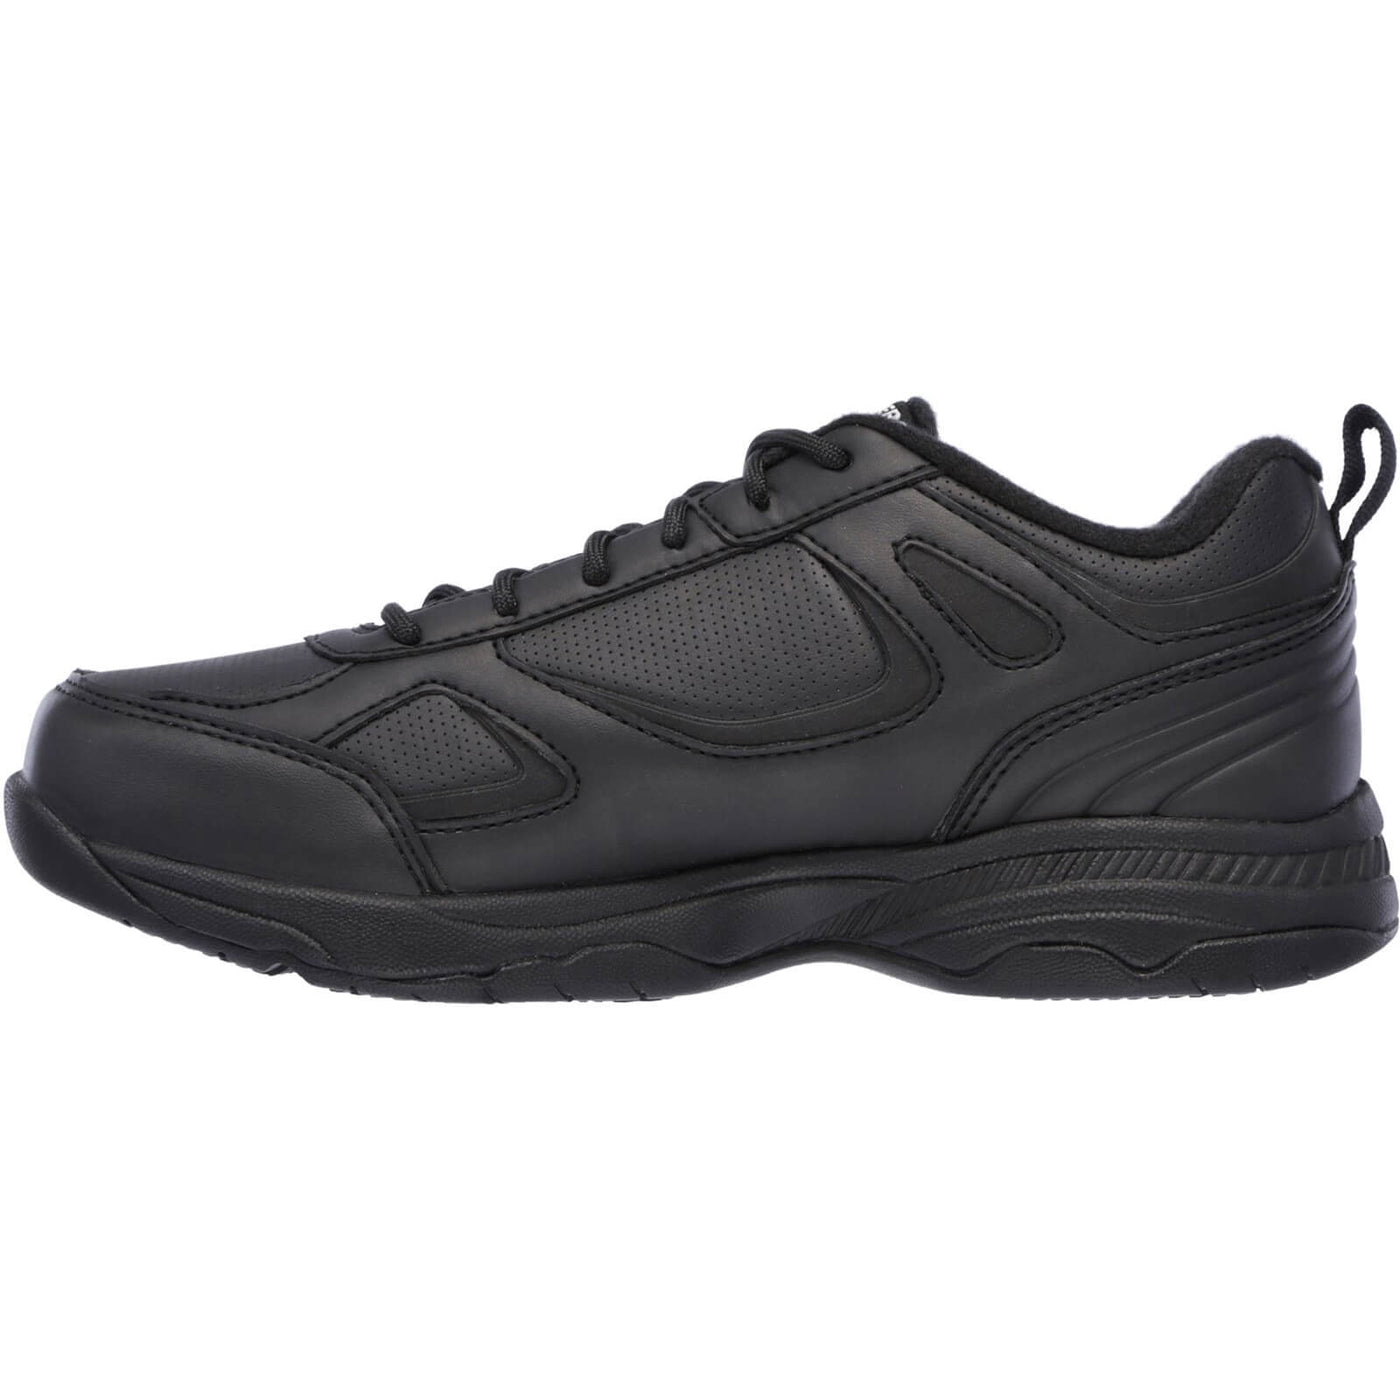 Skechers Work Relaxed Fit: Dighton - Bricelyn SR Safety Shoes Black 5#colour_black